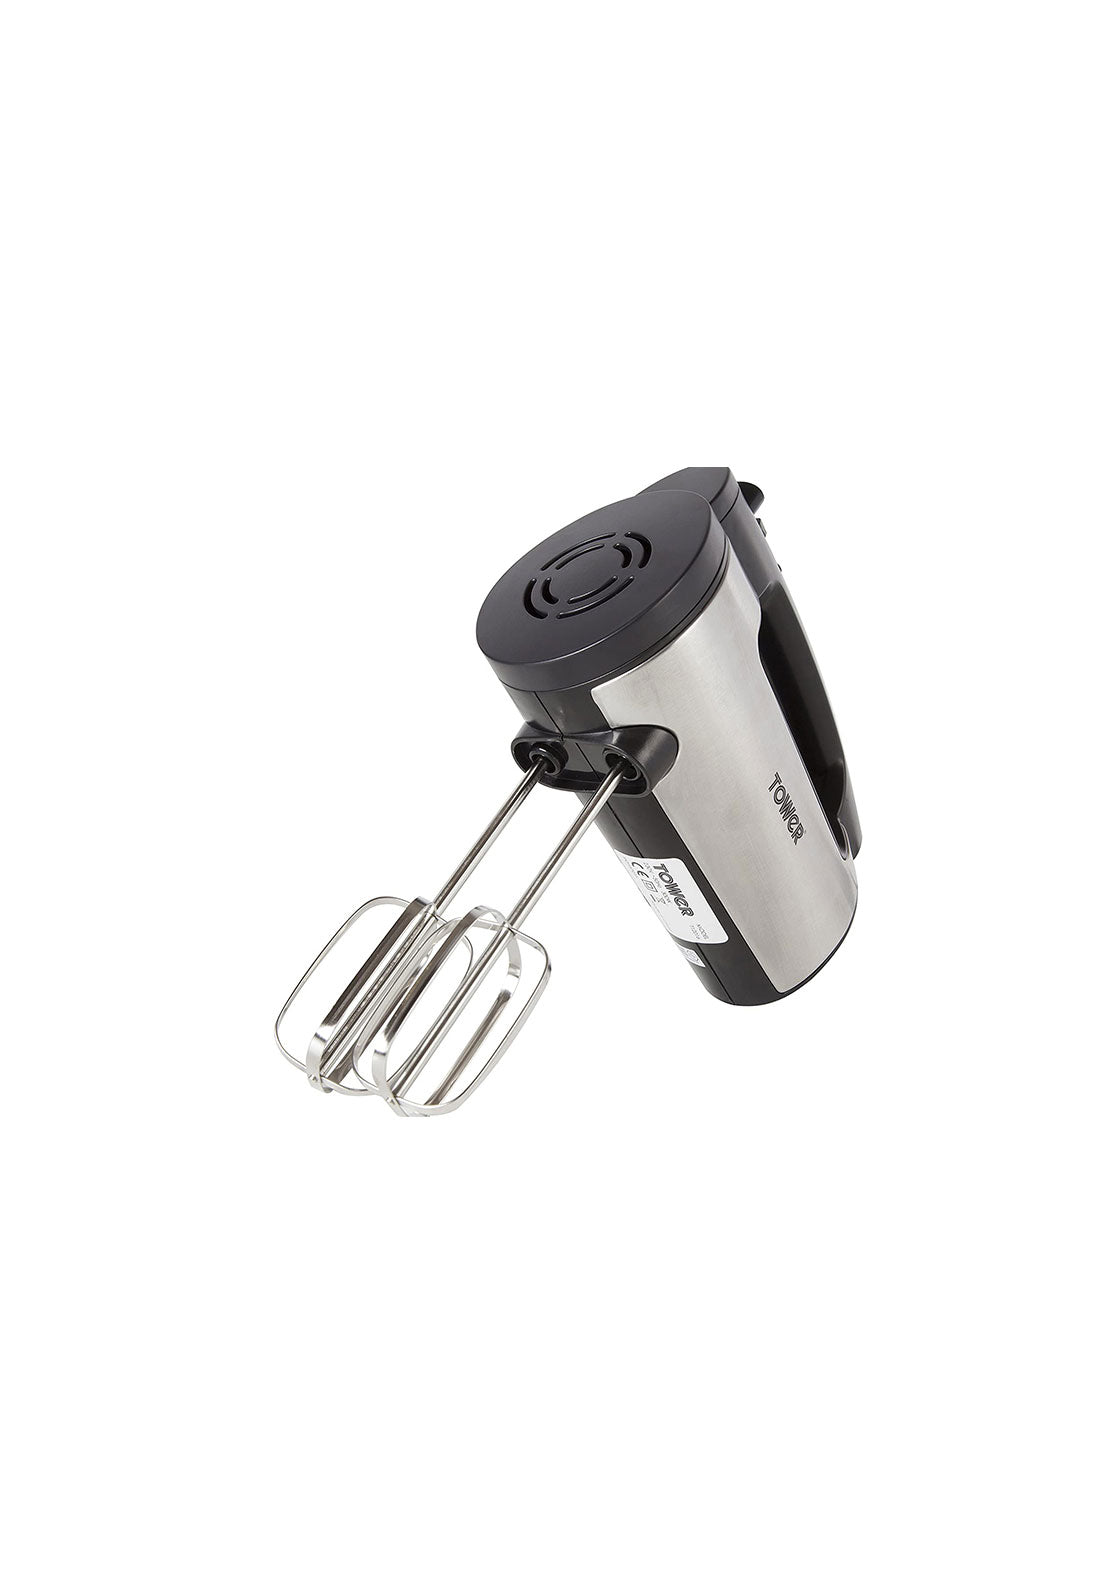 Tower 300W Stainless Steel Hand Mixer | T12016 1 Shaws Department Stores